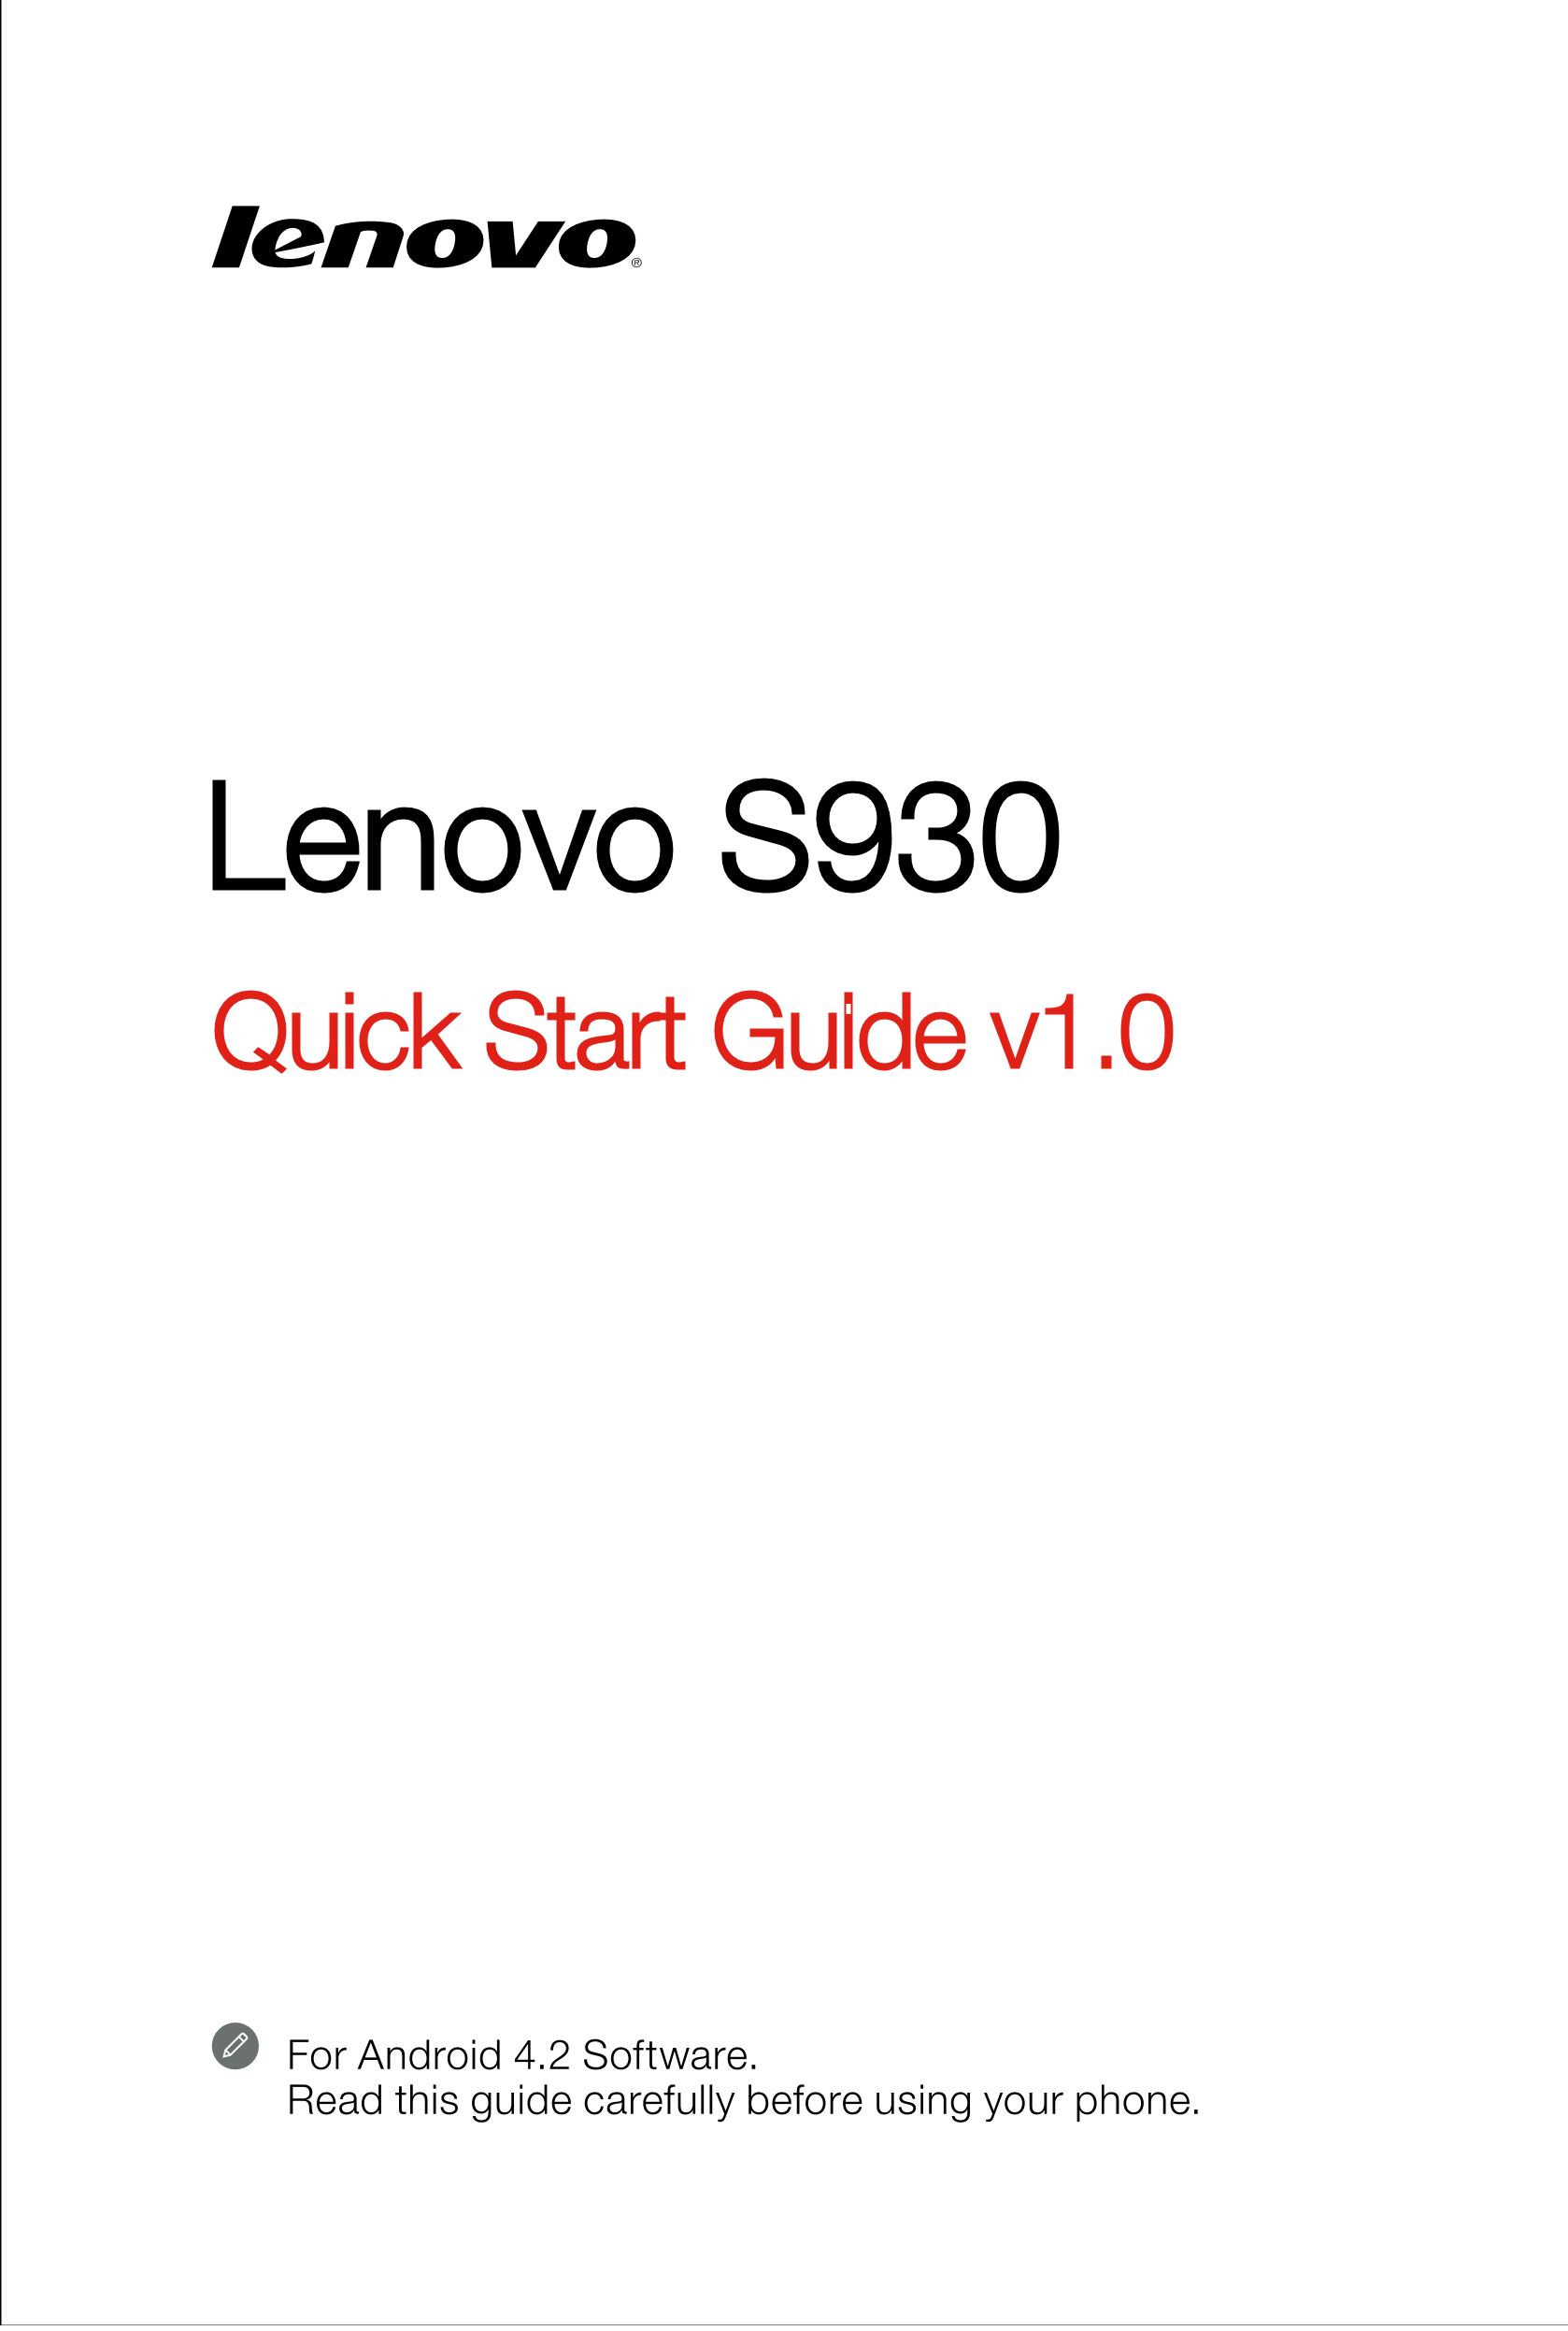 Lenovo S930
Quick Start Guide v1.0
For Android 4.2 Software. 
Read this guide carefully before using your phone. 